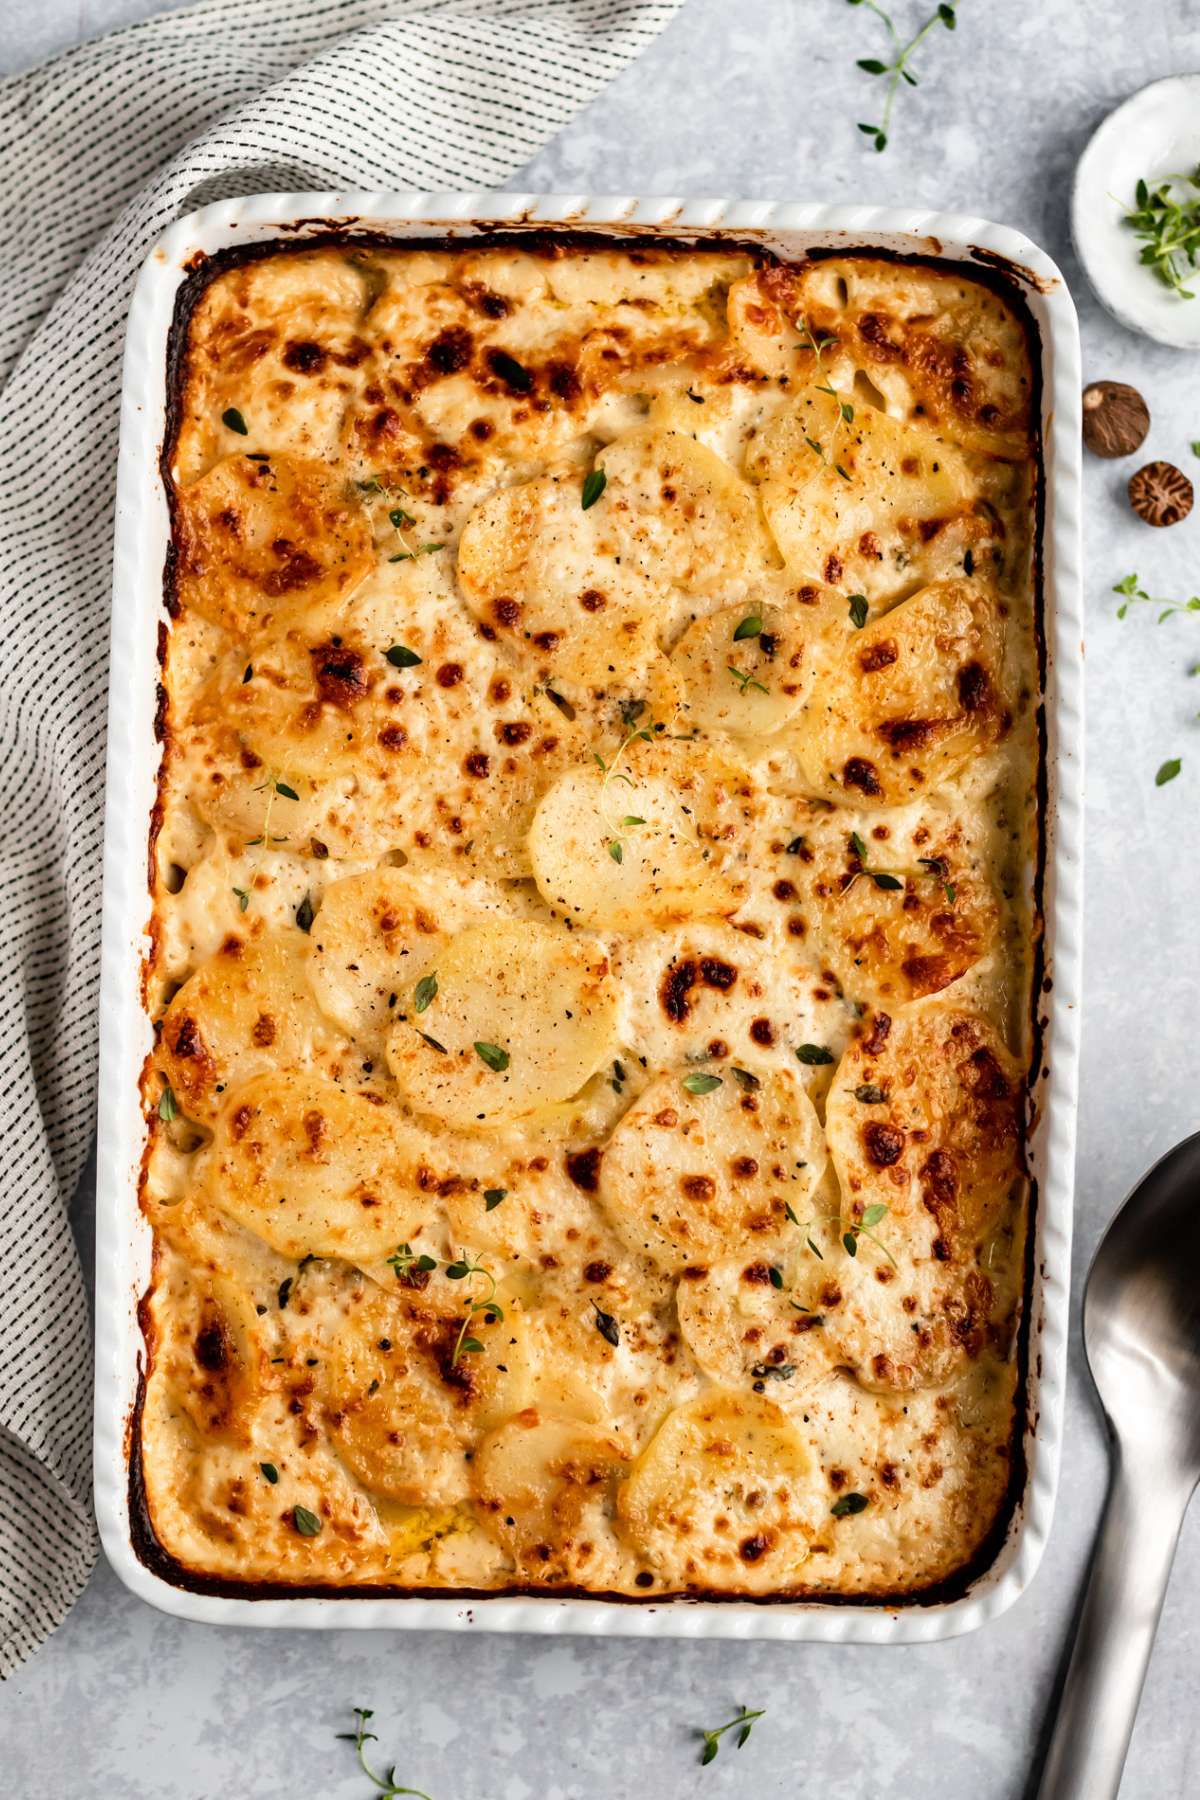 Baked scalloped potatoes in a white casserole dish.